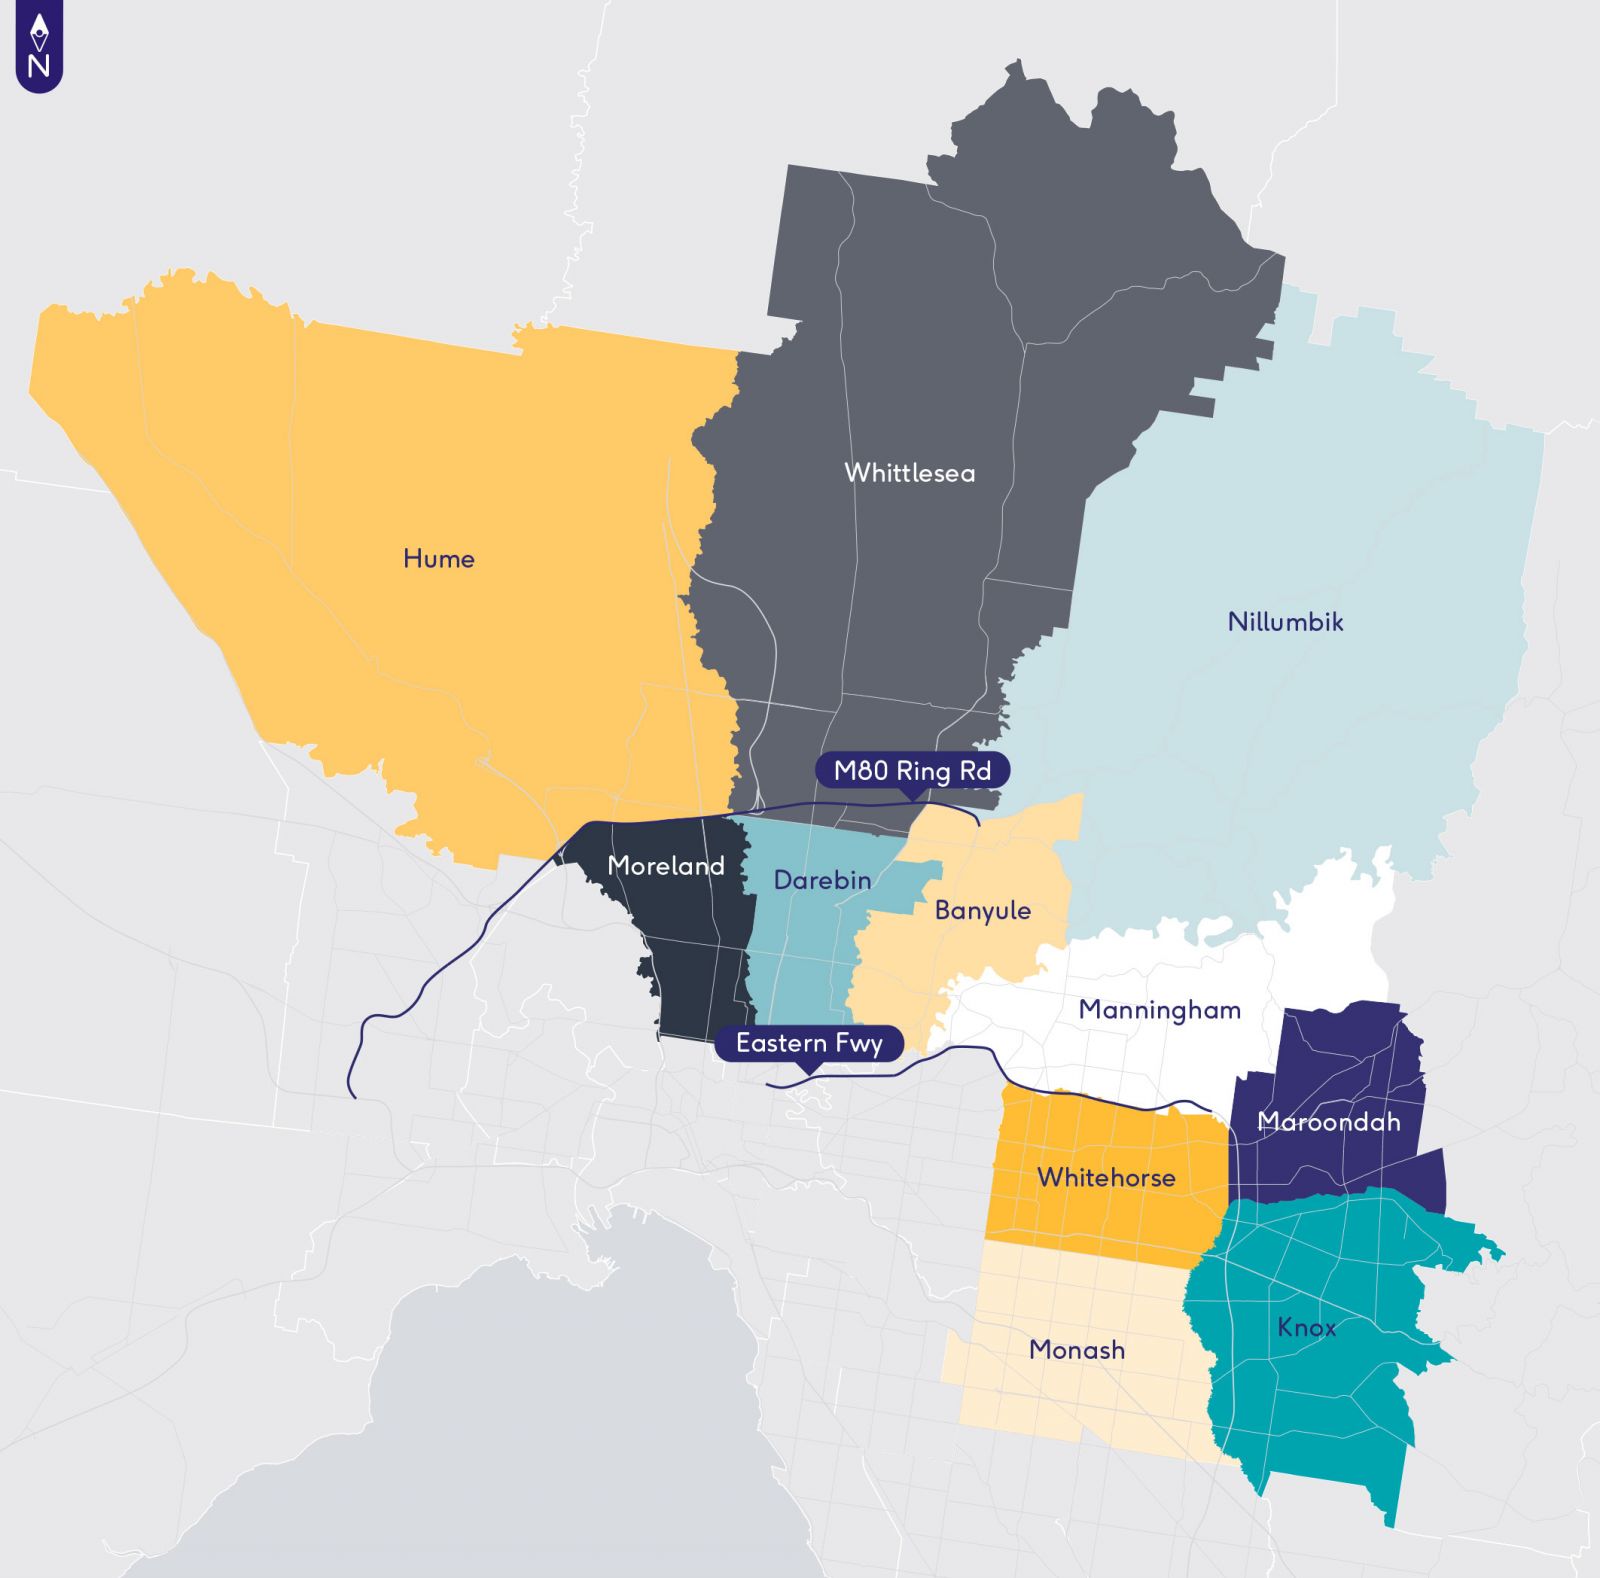 A map showing council areas, highlighting Banyule, Darebin, Hume, Knox, Manningham, Maroondah, Monash, Moreland, Nillumbik, Whitehorse and Whittlesea and the M80 Ring Road and Eastern Freeway.